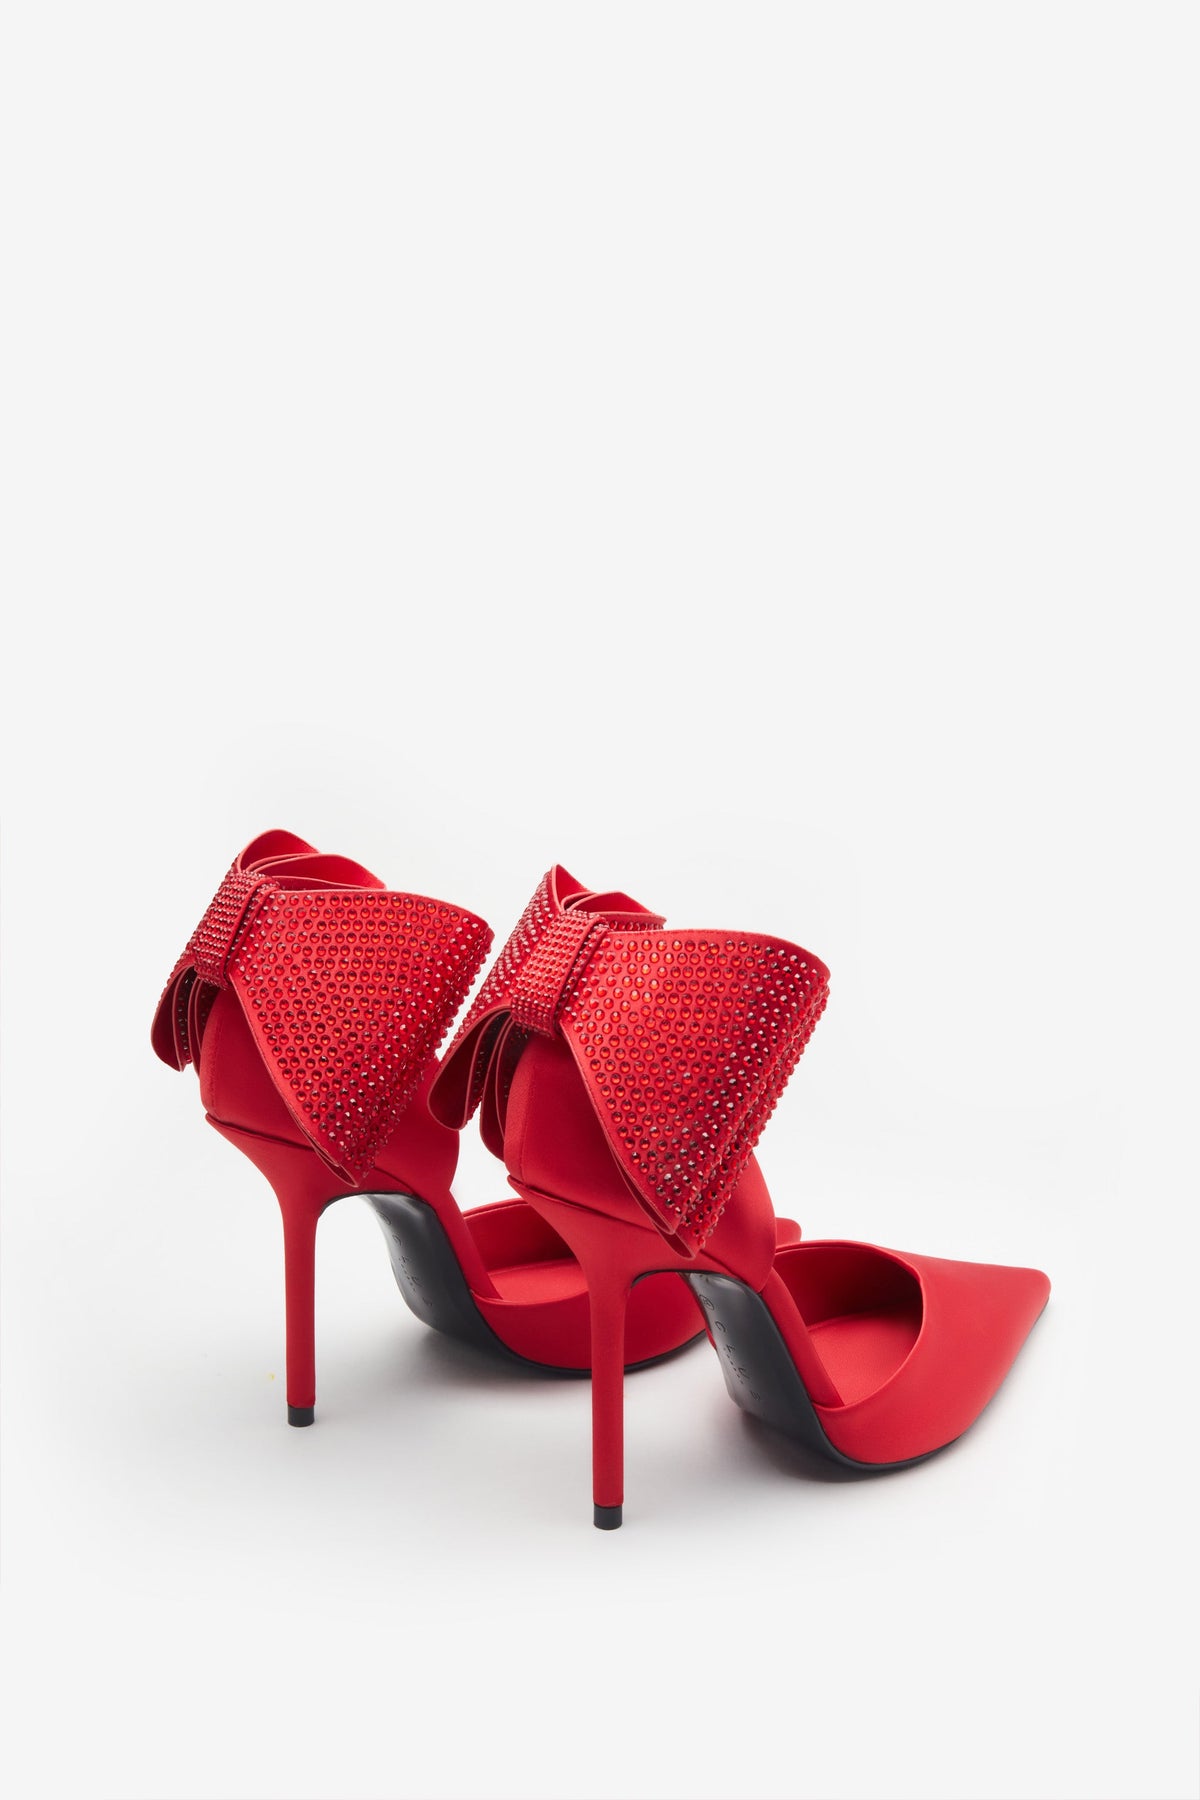 Red Heels | Red Stiletto, Platform & High Heeled Shoes | ASOS